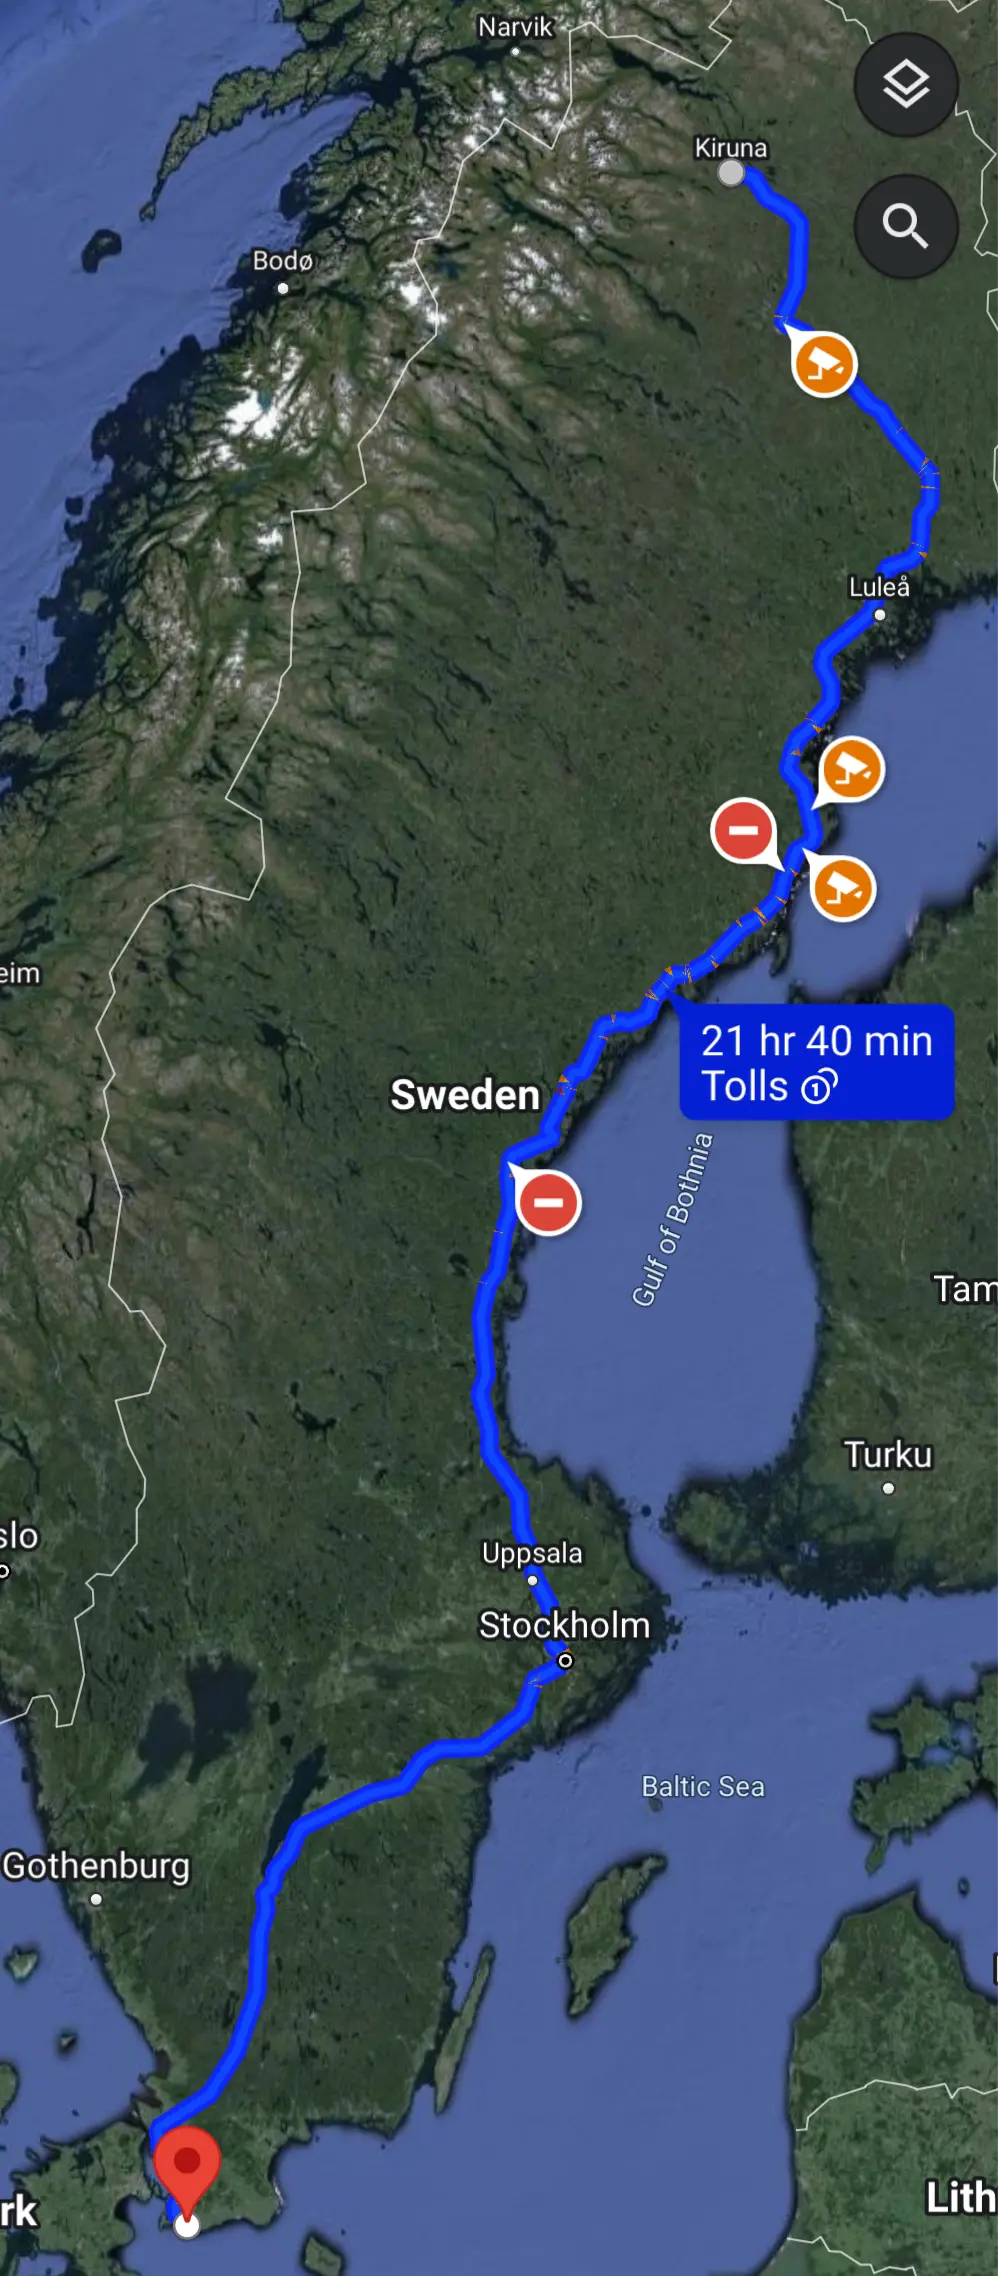 Map of Sweden showing path from Kiruna to Trelleborg with the text 21 hours and 40 minutes